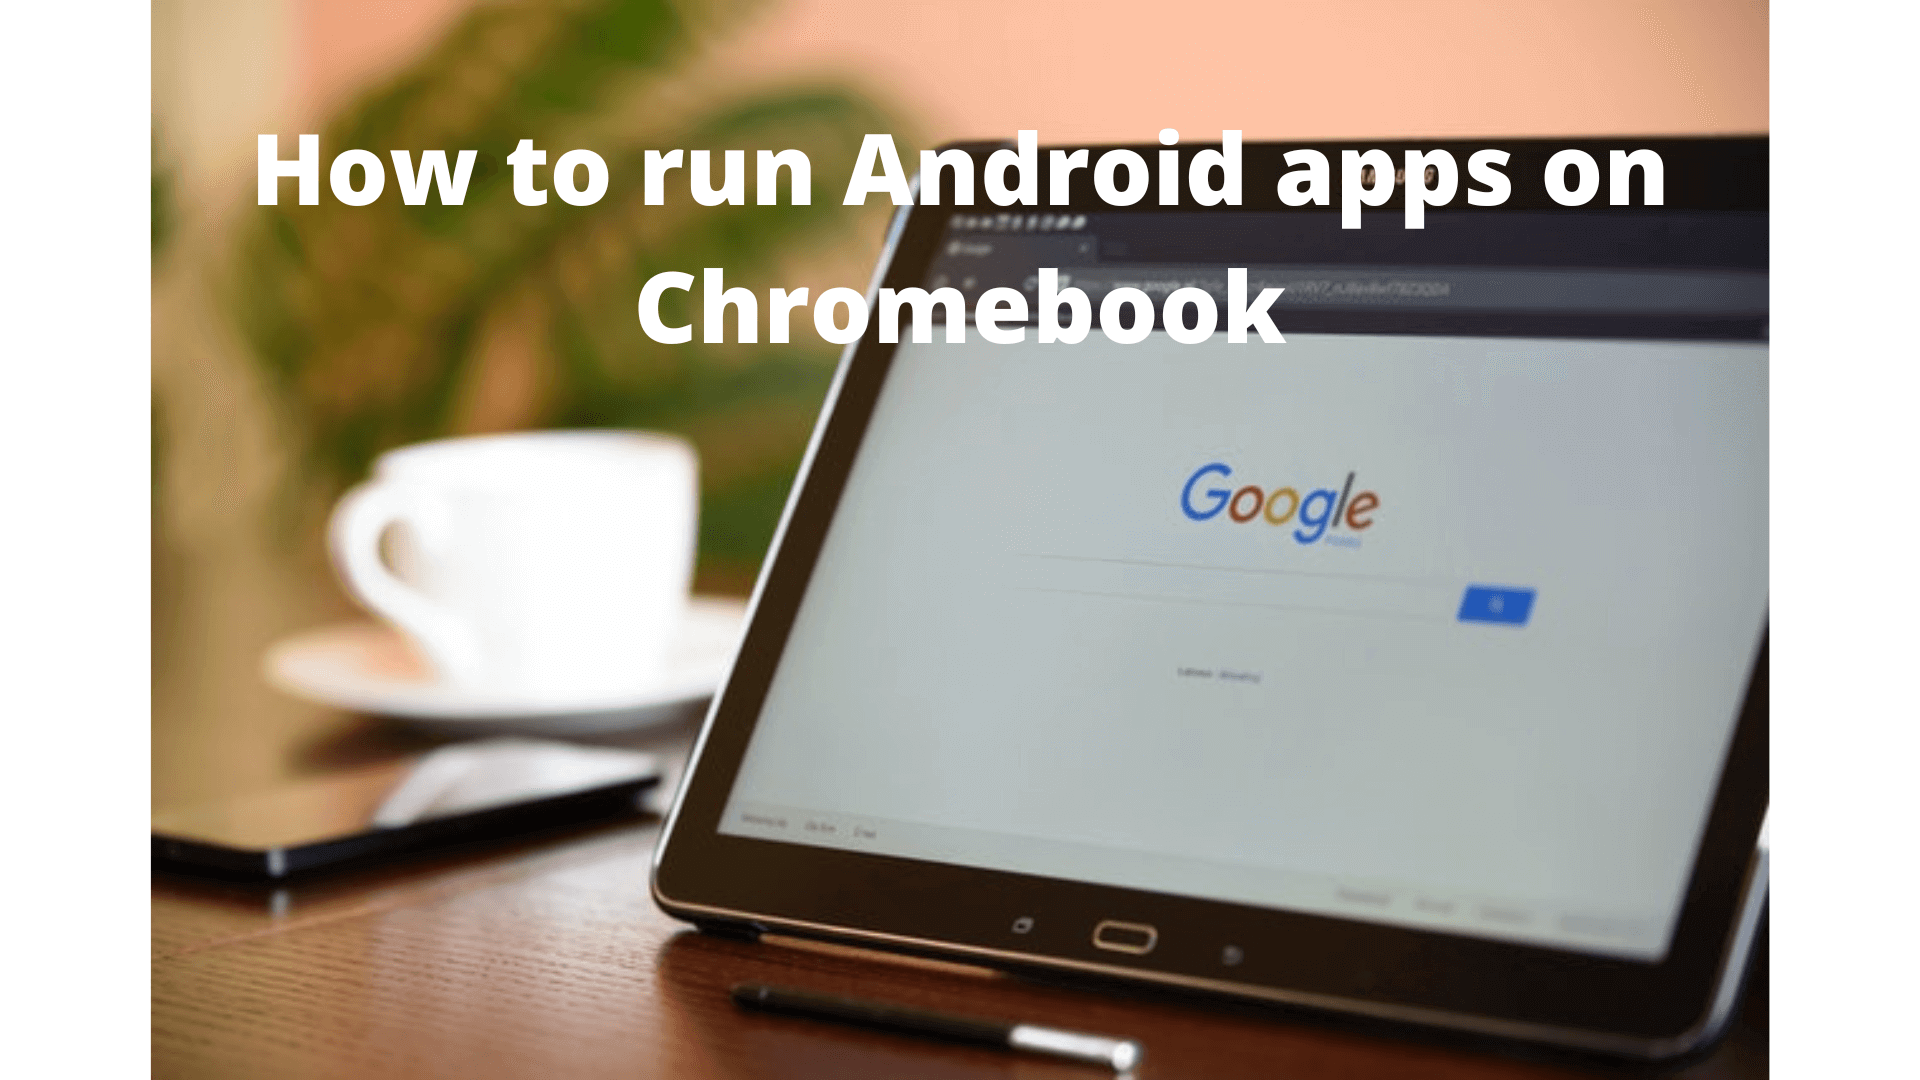 How to run Android apps on Chromebook